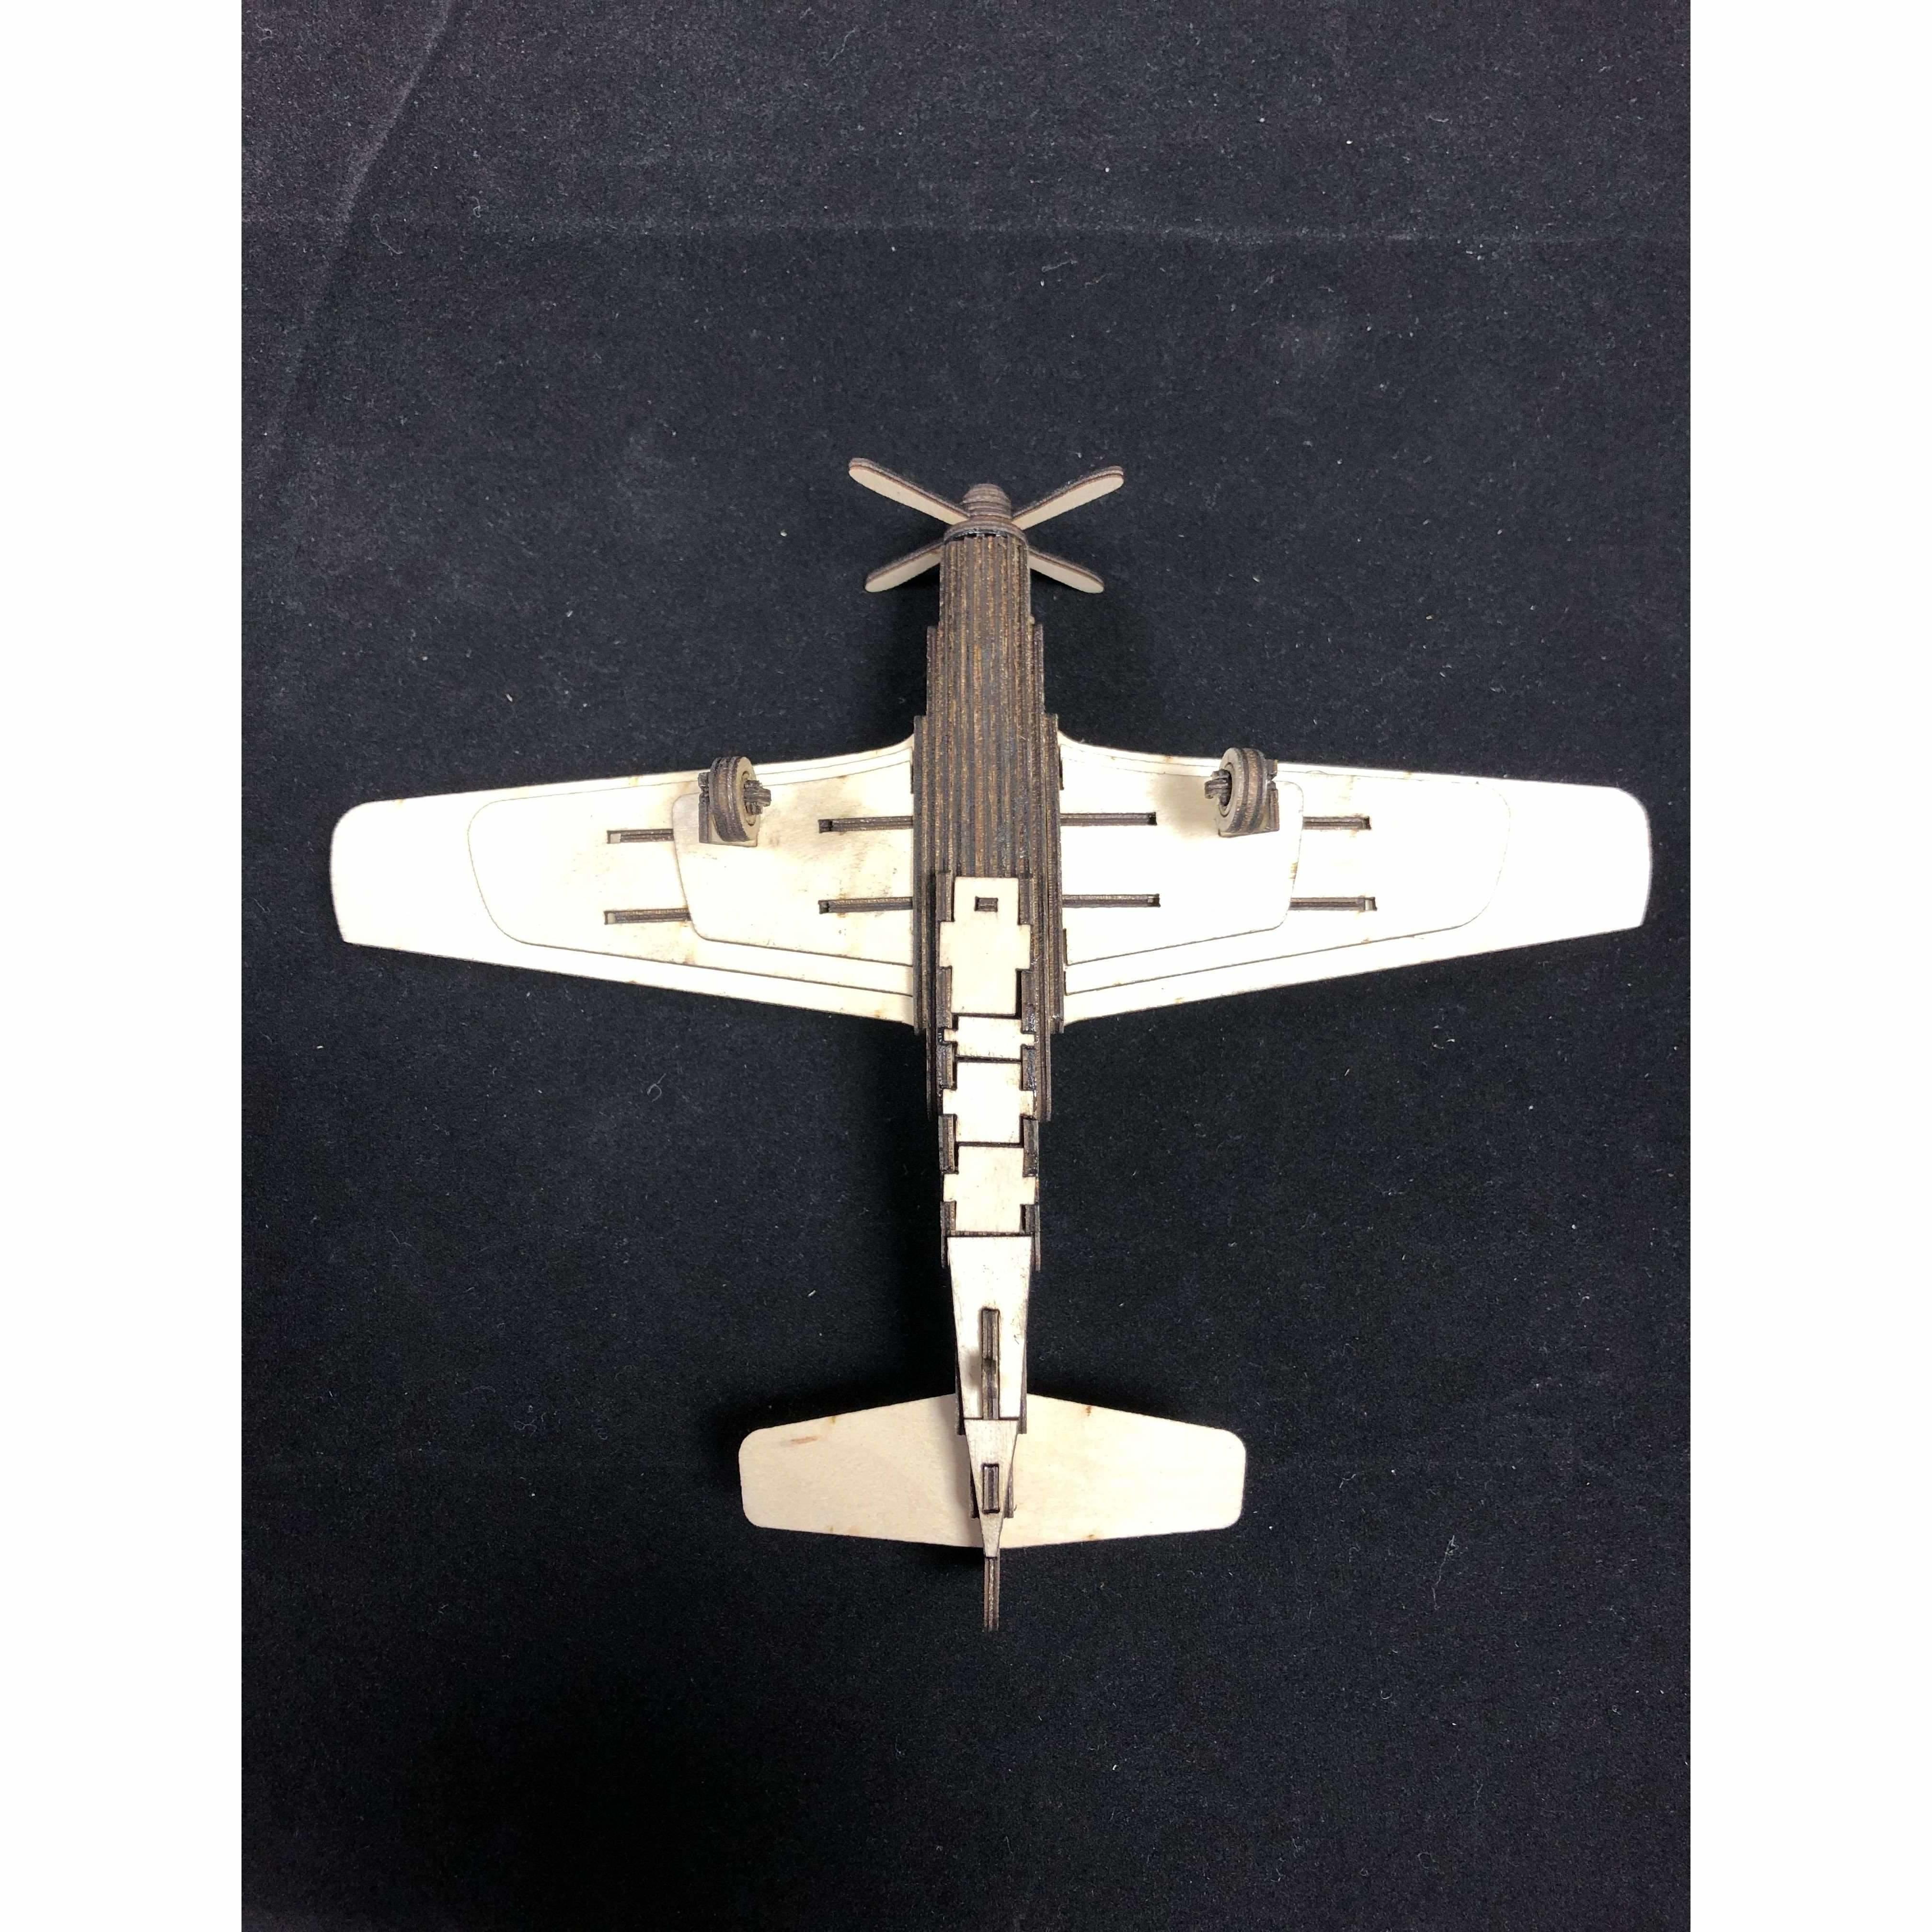 Red Berry Crafts Ltd:Mustang P51 3D Model Kit